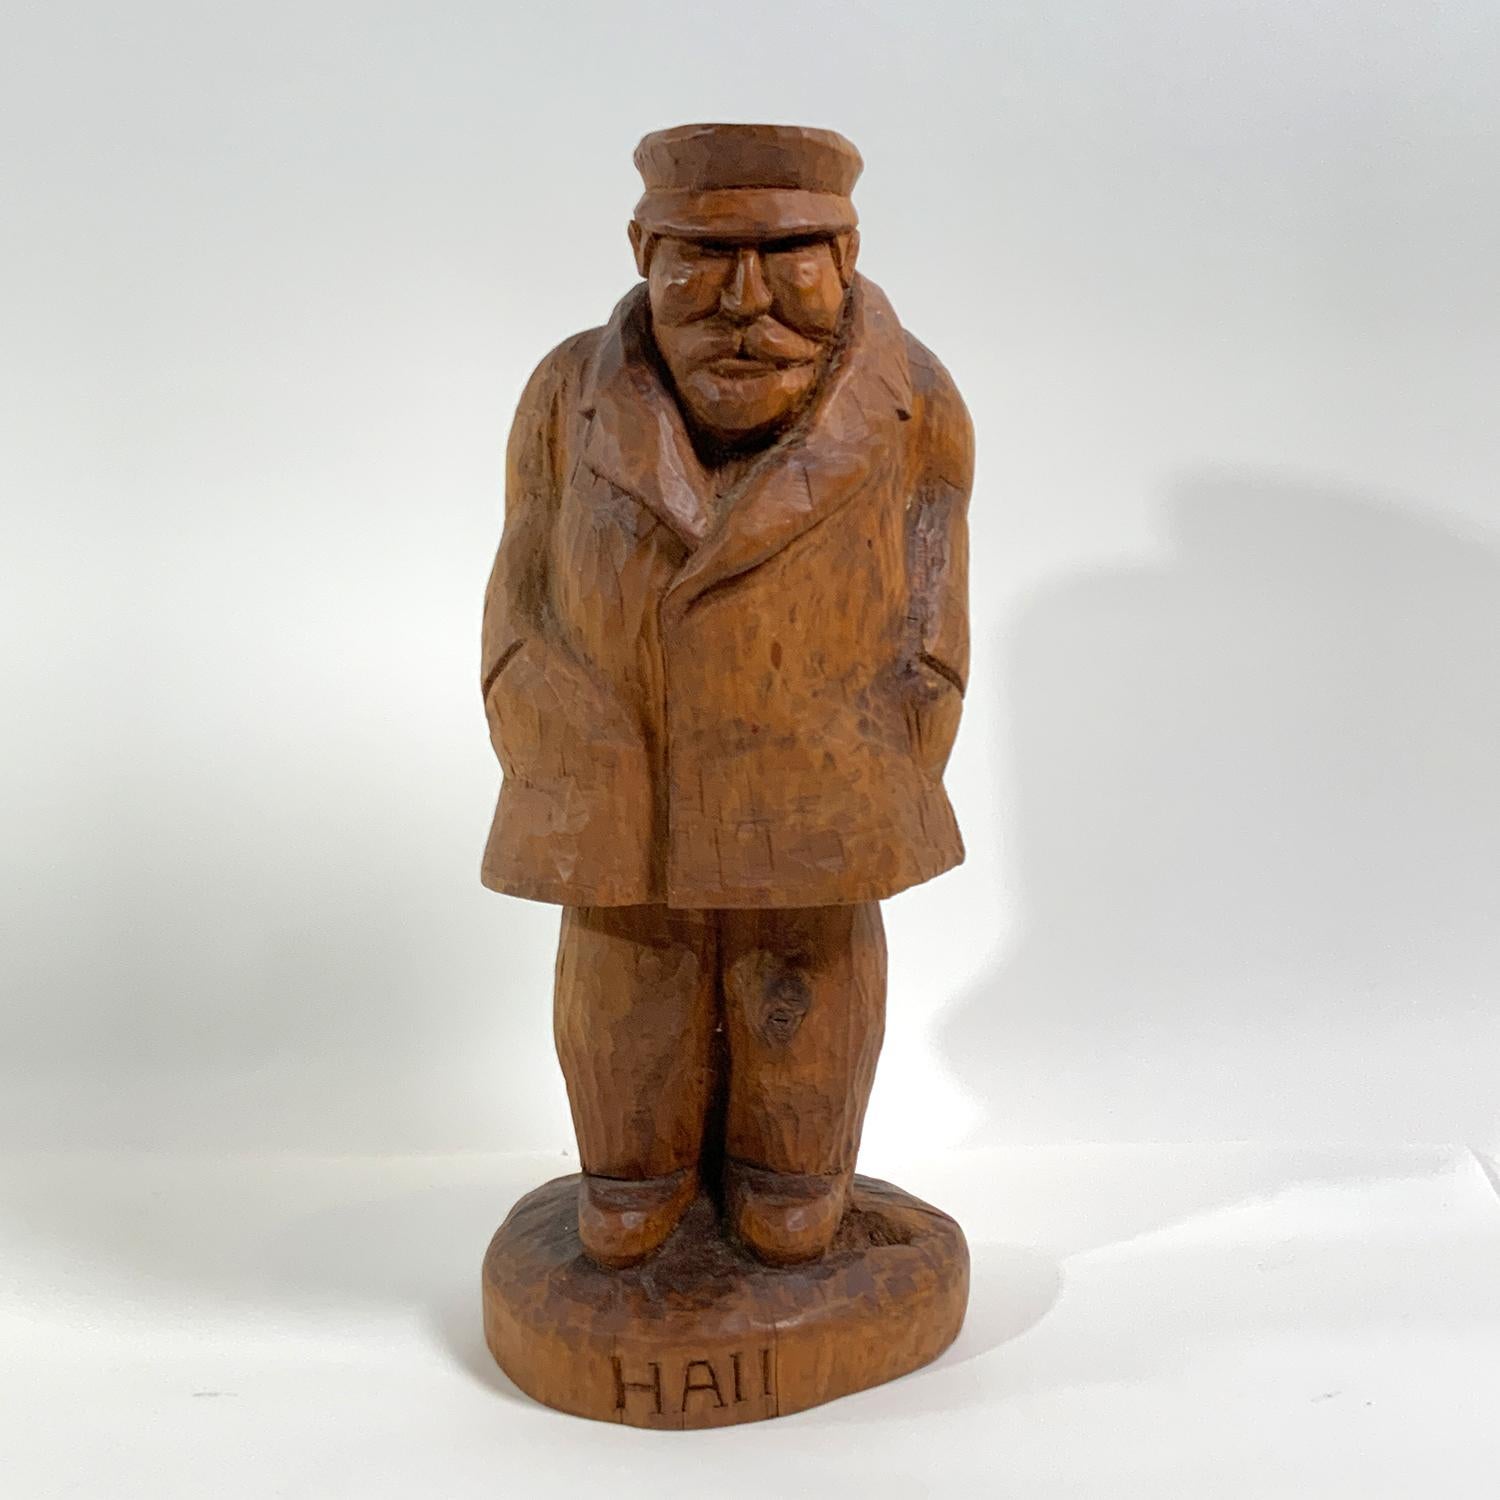 Folk art carving of a Sea Captain in his deck coat and cap. Historic old carving. What a great maritime relic. Circa 1930.